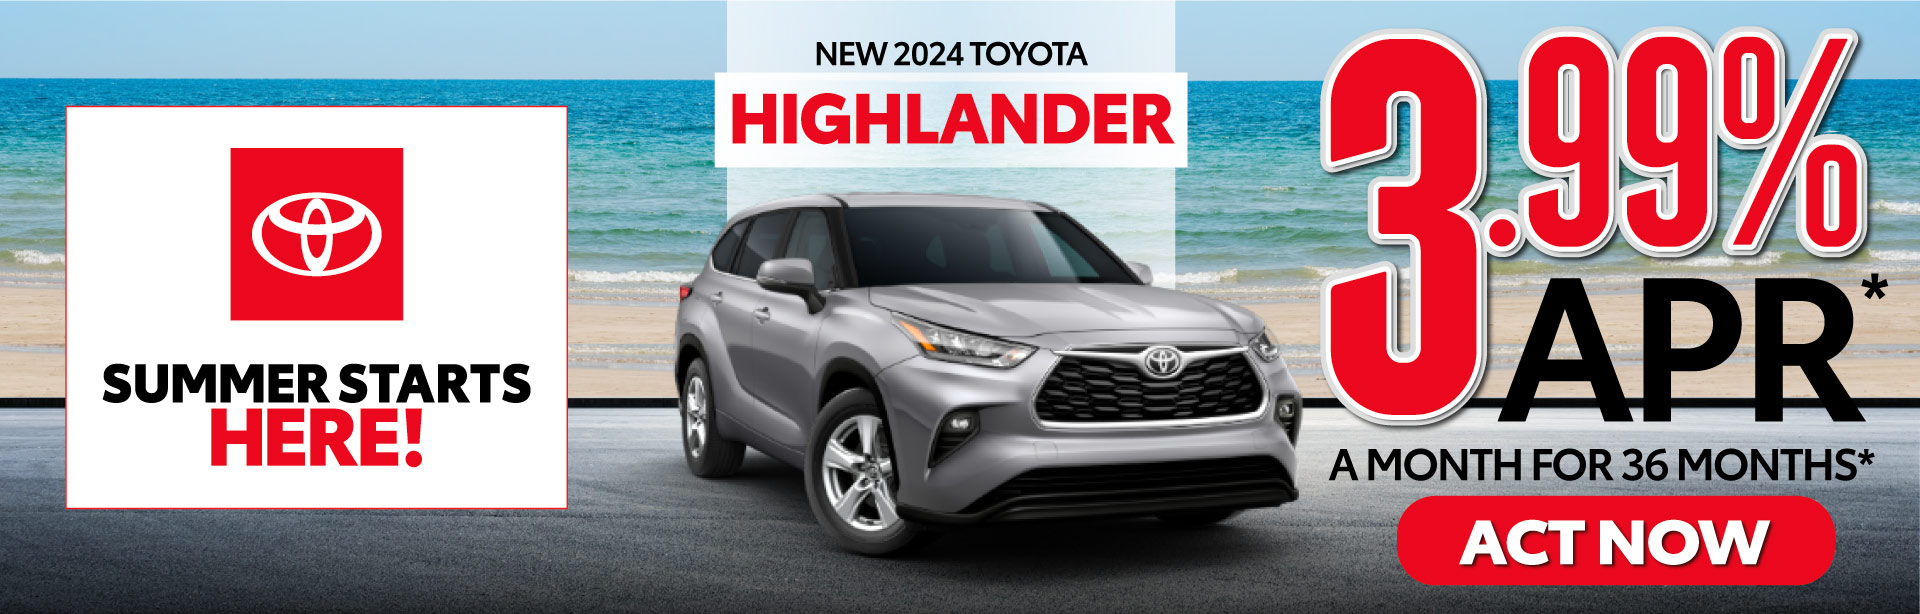 New 2024 Toyota Highlander - 3.99% APR a month for 36 months* | Act Now